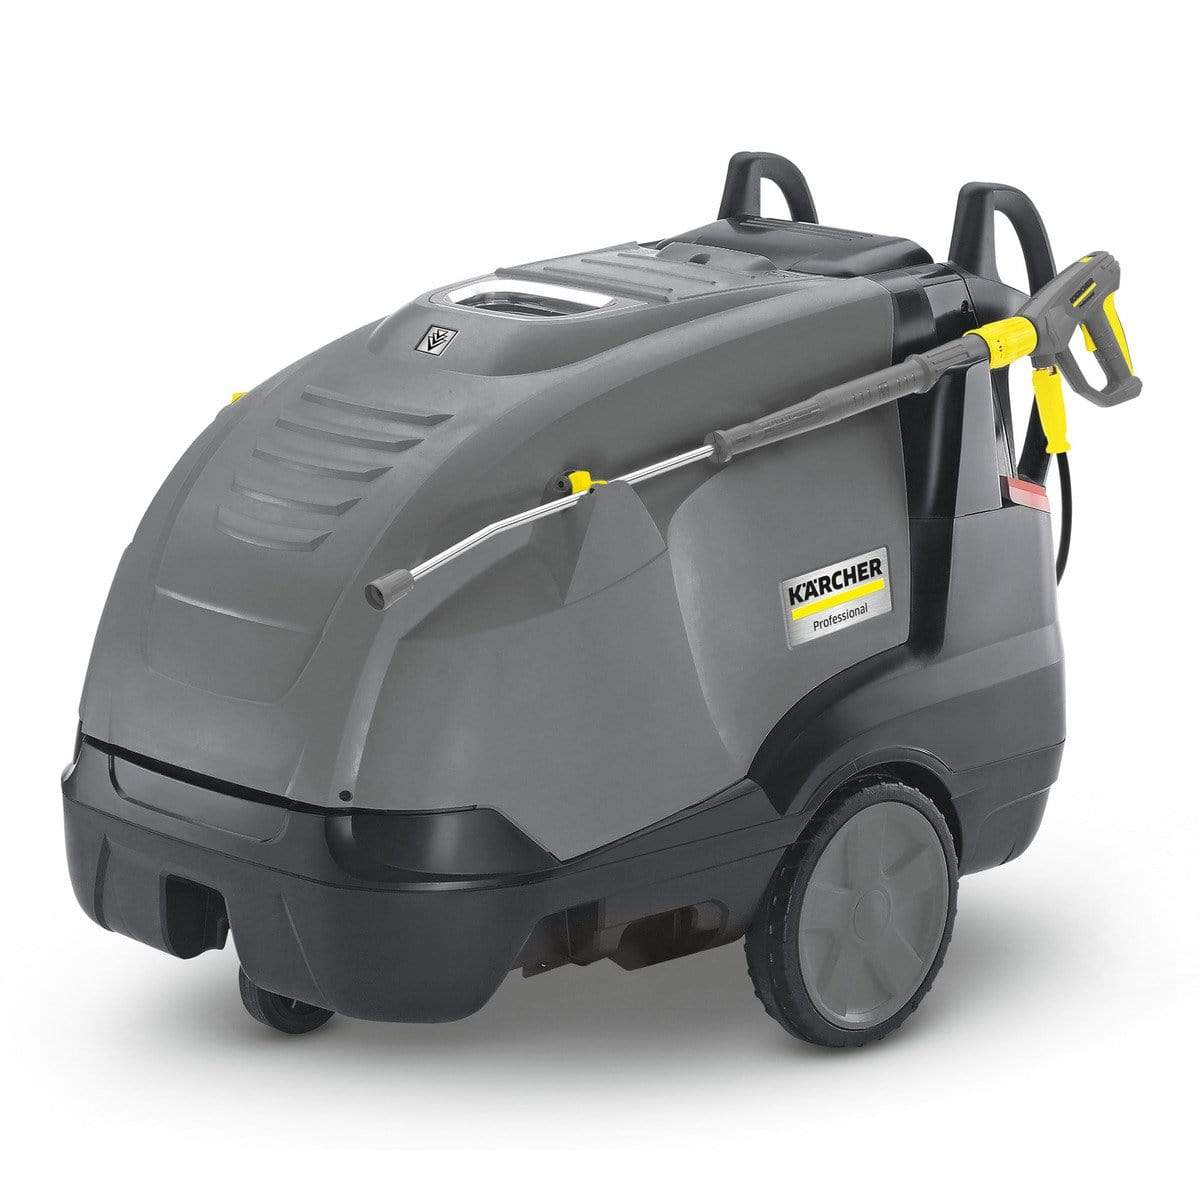 Karcher Hot and Cold High Pressure Washer 200 Bar - HDS 10/20-4 M | Supply Master | Accra, Ghana Tools Building Steel Engineering Hardware tool